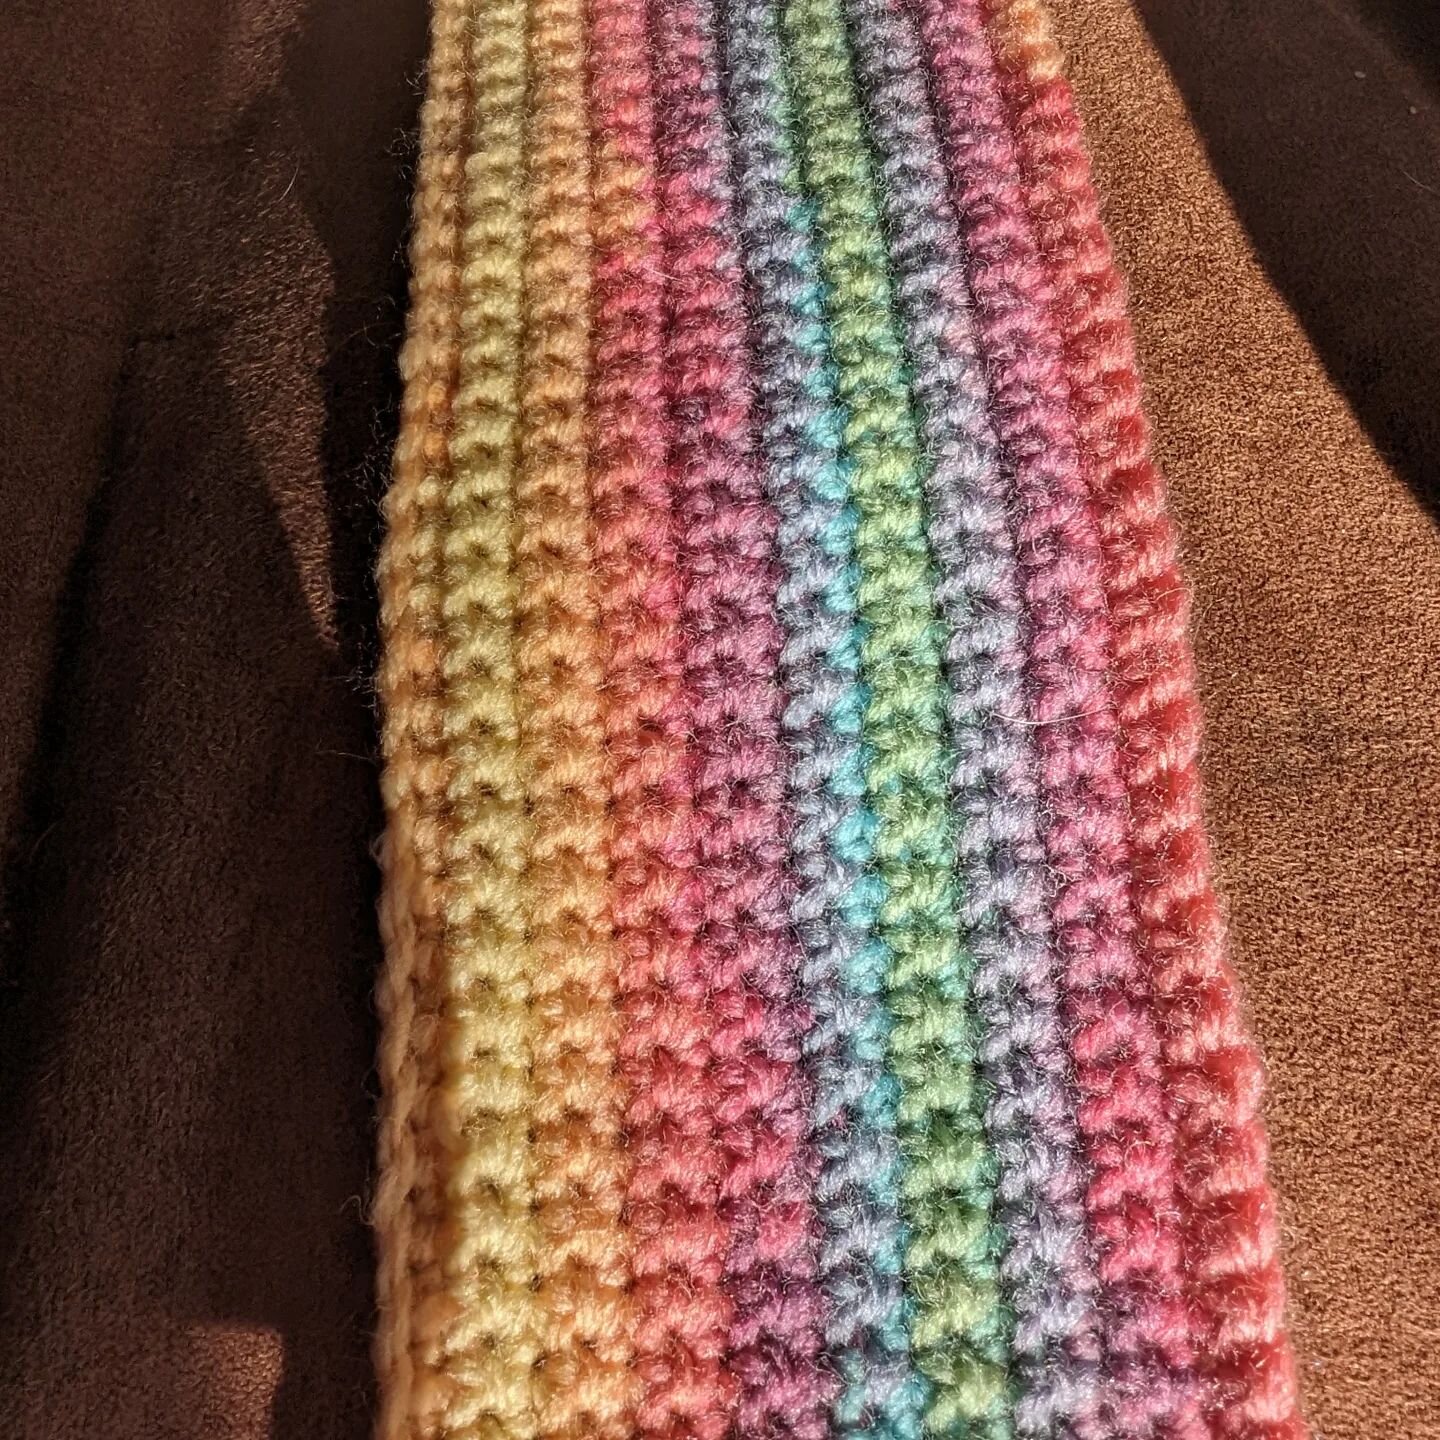 With the sun shining I thought it time to start on something for when spring arrives. 

#crochet #knitwear #handmade #rainbow #spring #nofilter #crochetersofinstagram #crochetaddict #crocheted #notknitting #yarn #wool #doubleknit #hayfield #shade0408